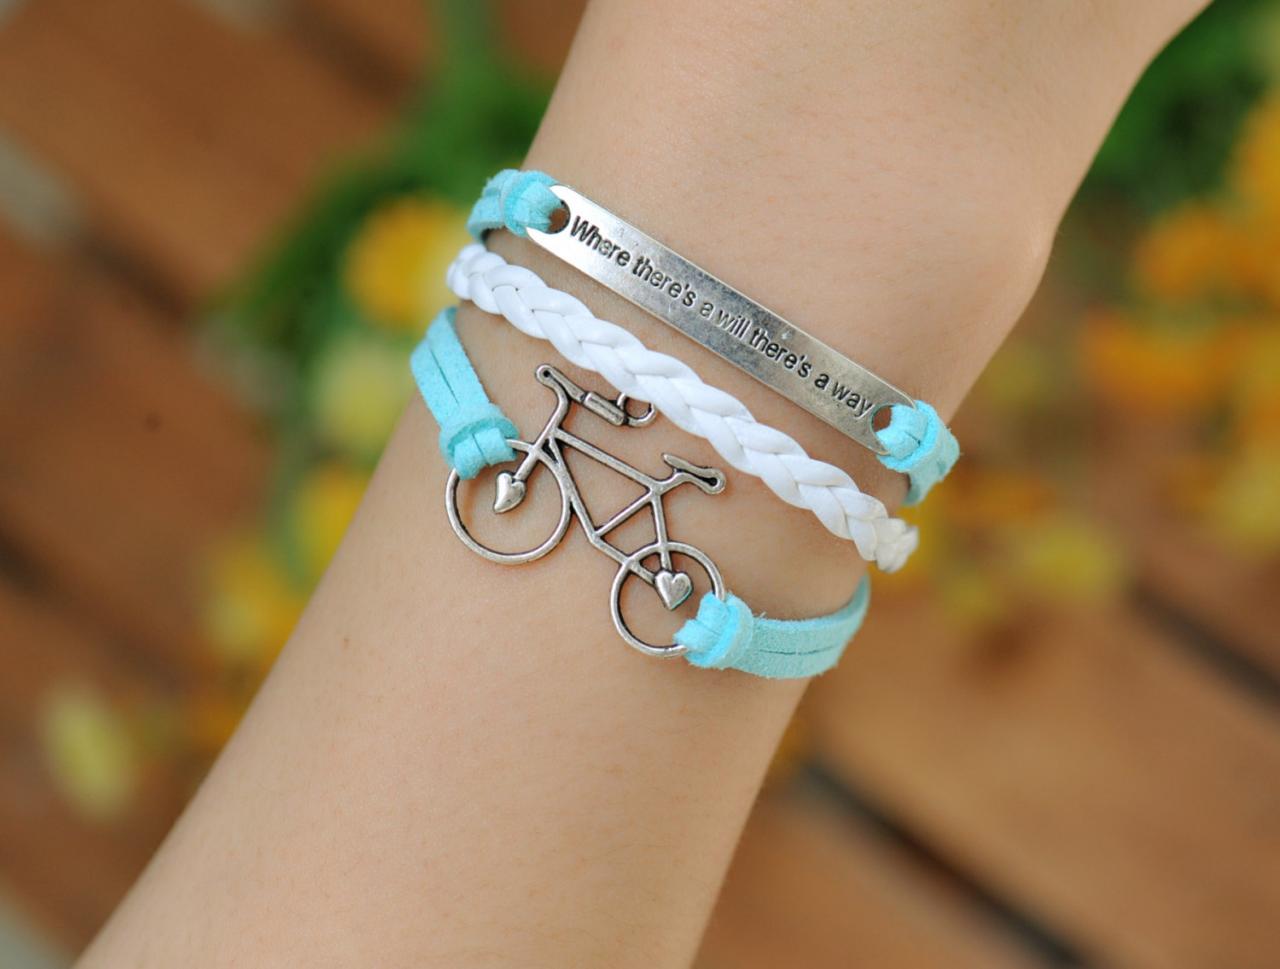 Bracelet, Bike Bracelet,retro Silver Love Bike,alloy Bracelet, Blue Leather Braid Bracelet,engraved Where There Is A Will There Is A Way